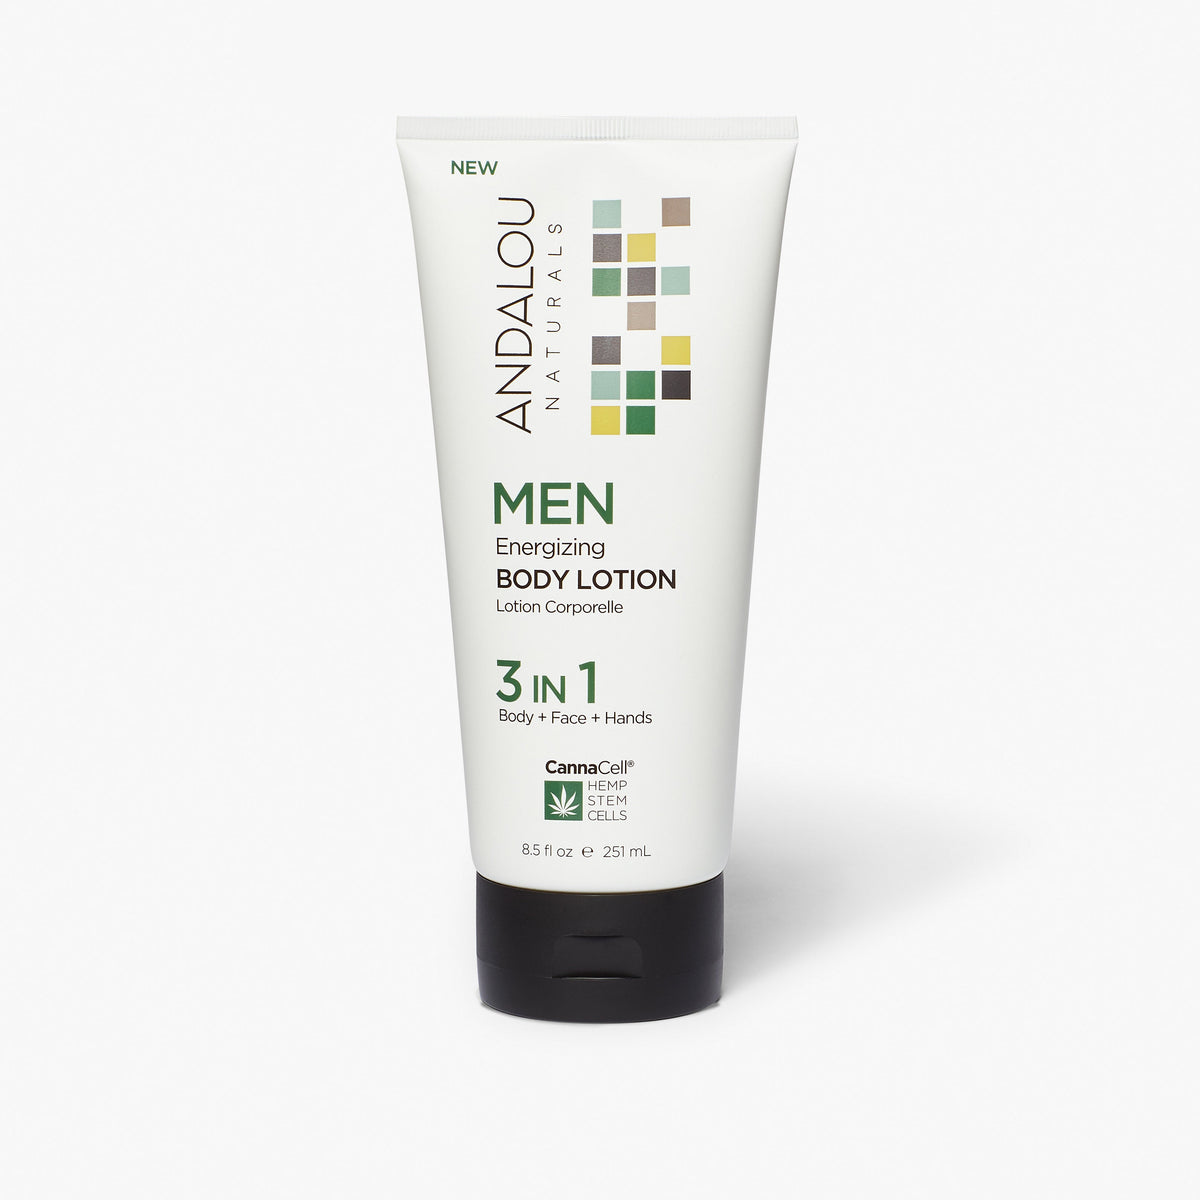 MEN Energizing Body Lotion 3 IN 1 - Default Title - by Andalou Naturals |ProCare Outlet|